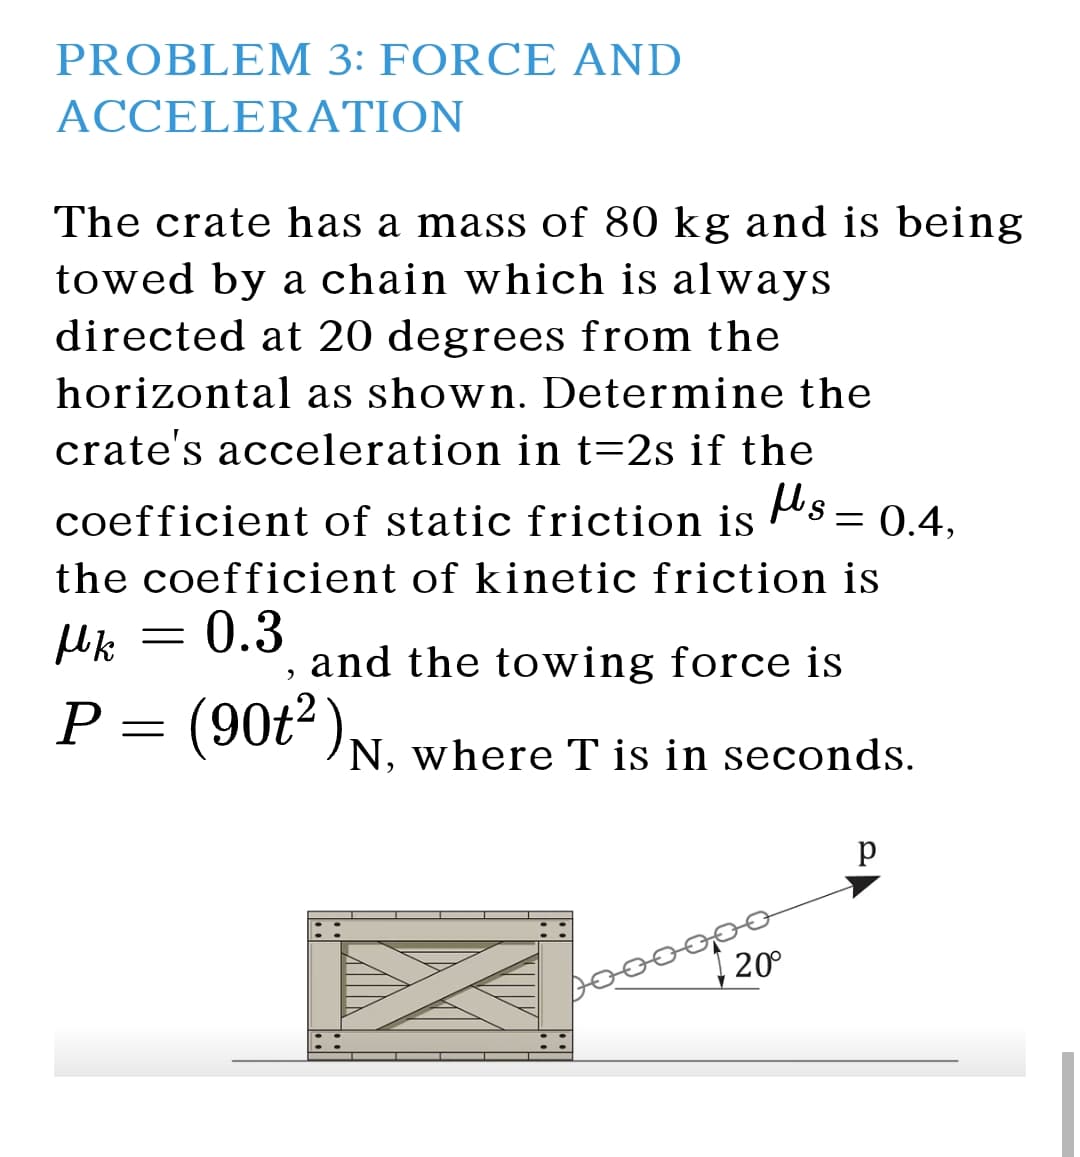 PROBLEM 3: FORCE AND
ACCELERATION
The crate has a mass of 80 kg and is being
towed by a chain which is always
directed at 20 degrees from the
horizontal as shown. Determine the
crate's acceleration in t=2s if the
coefficient of static friction is
Hs = (
= 0.4,
the coefficient of kinetic friction is
= 0.3
, and the towing force is
P = (90t“ )N, where T is in seconds.
20°
